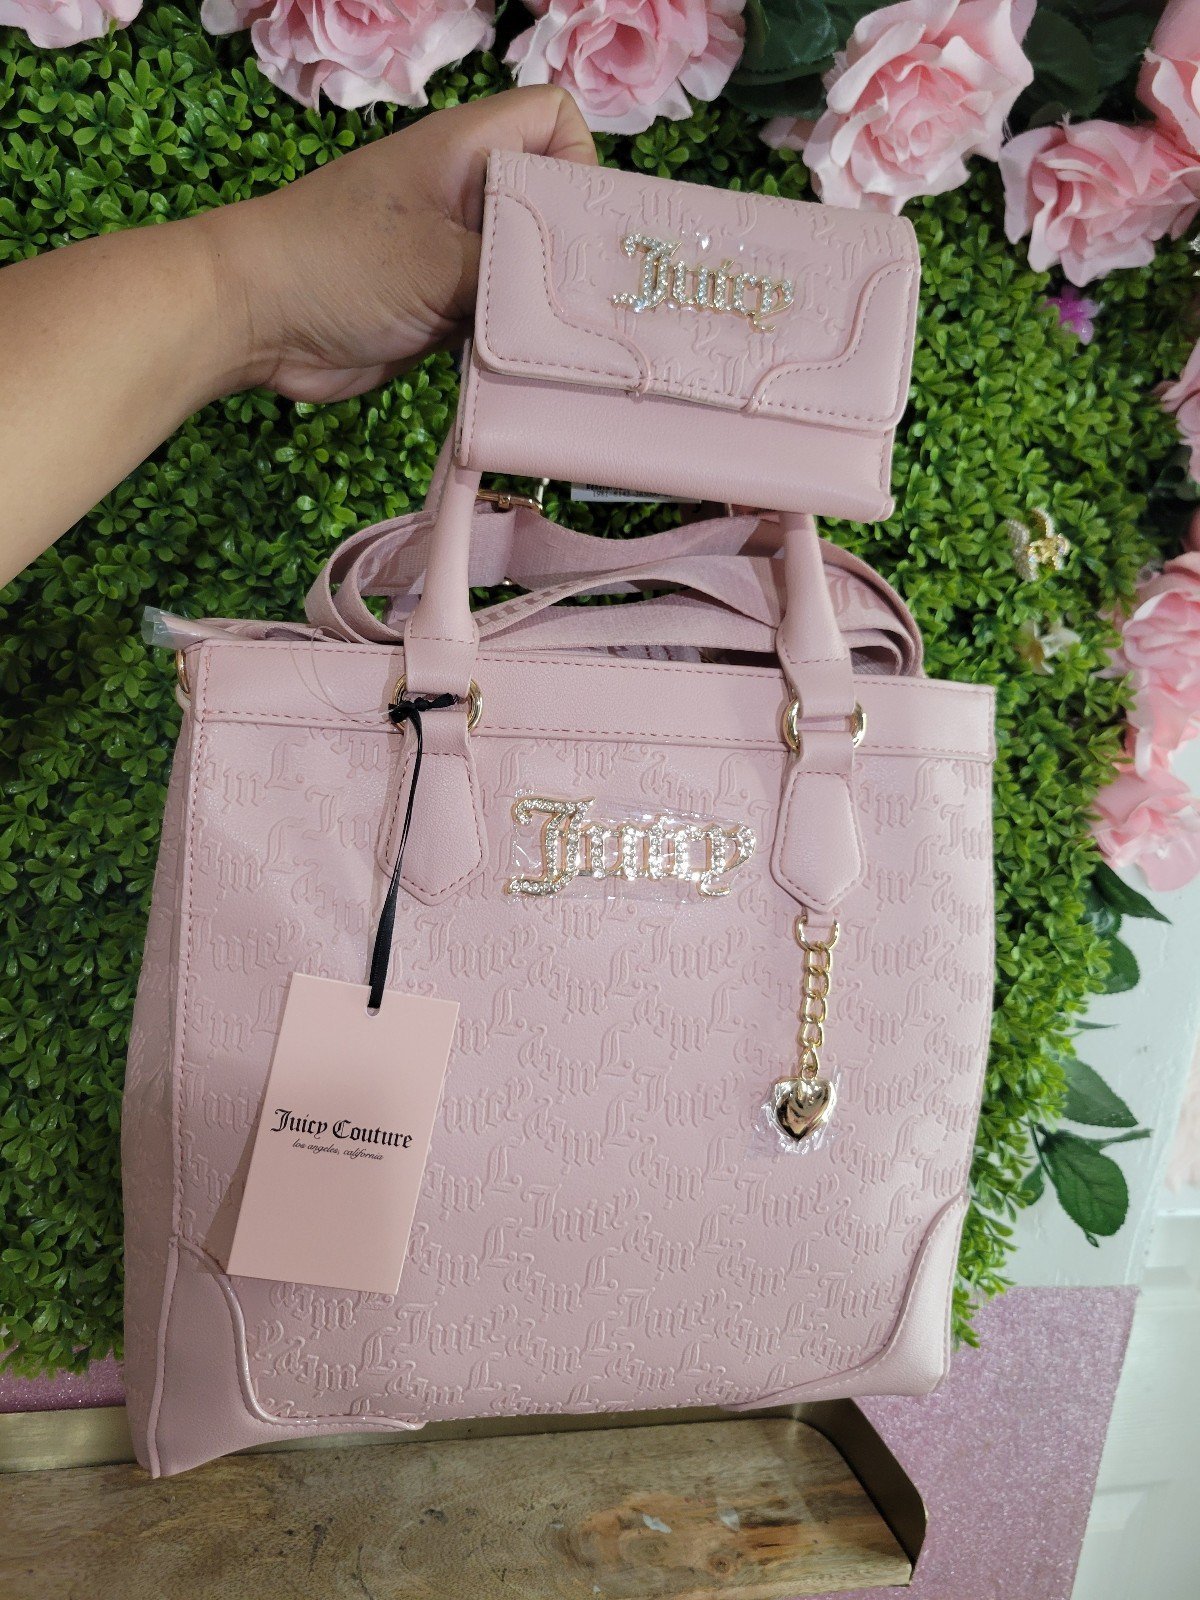 Juicy Couture  PINK DIAMOND
HEARTLESS TOTE A7wY9SDYV